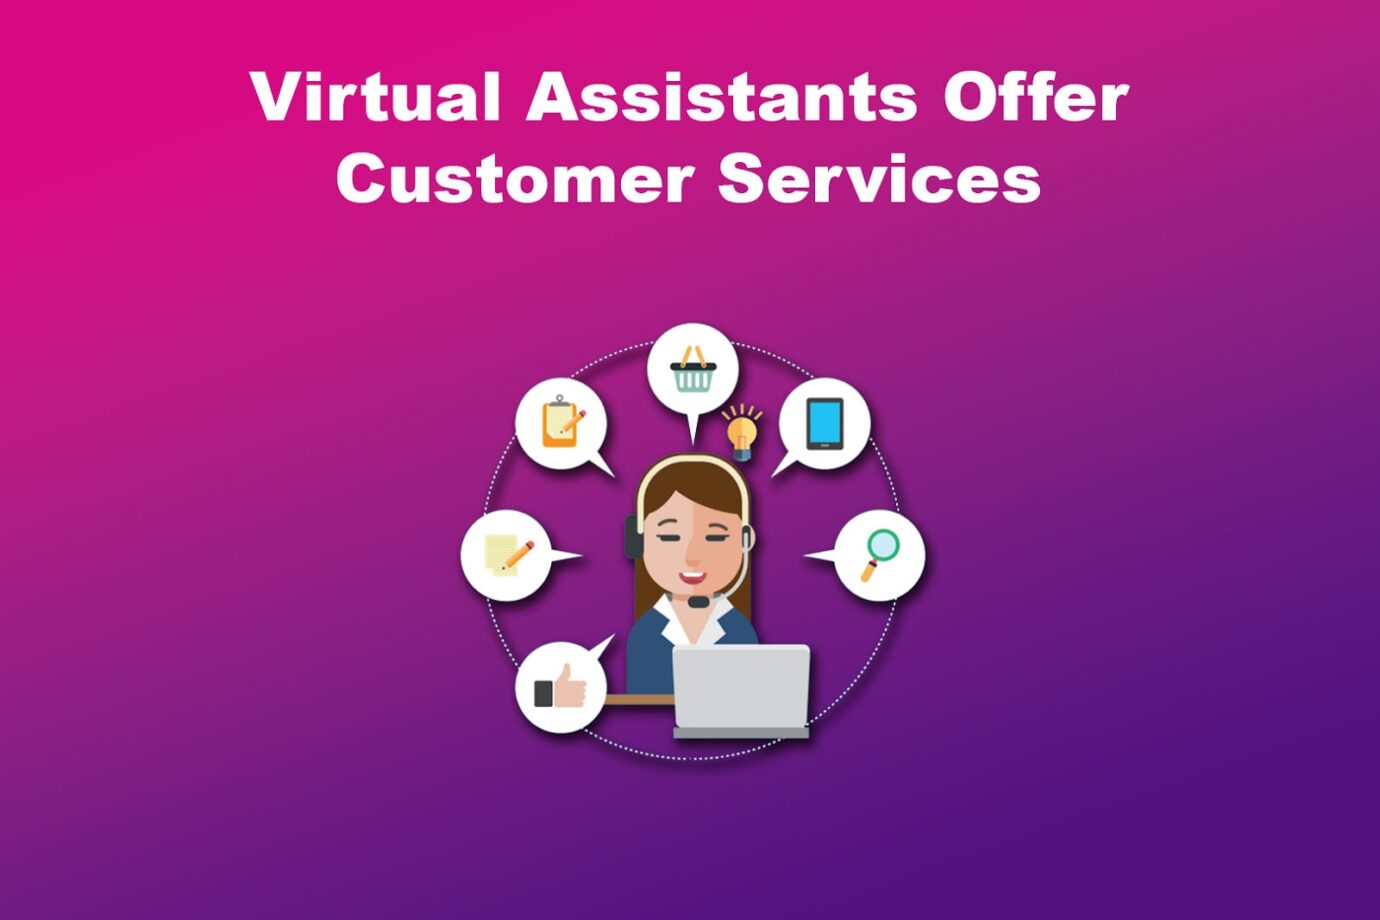 Virtual Assistants Offer Customer Services